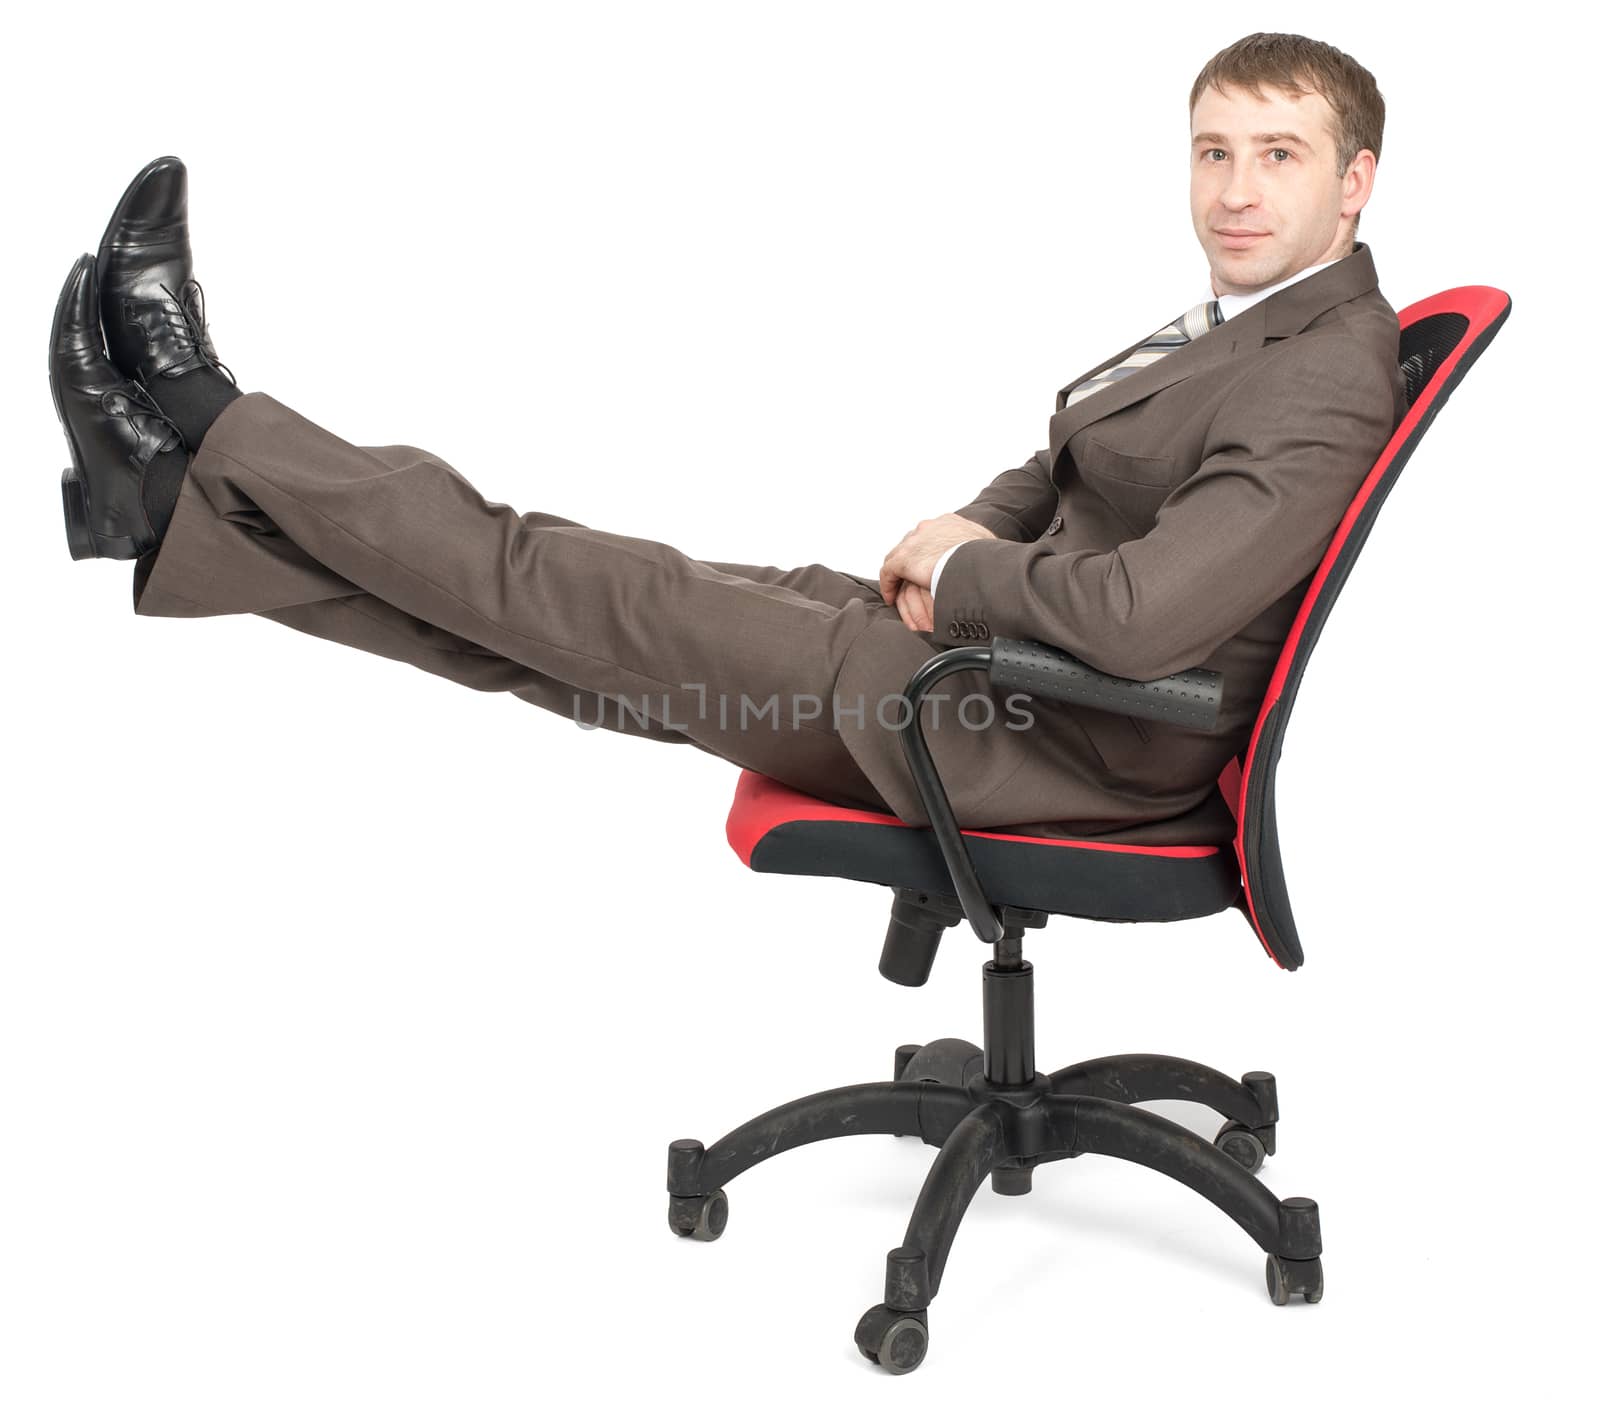 Businessman sitting on chair with legs up and looking at camera isolated on white background, side view